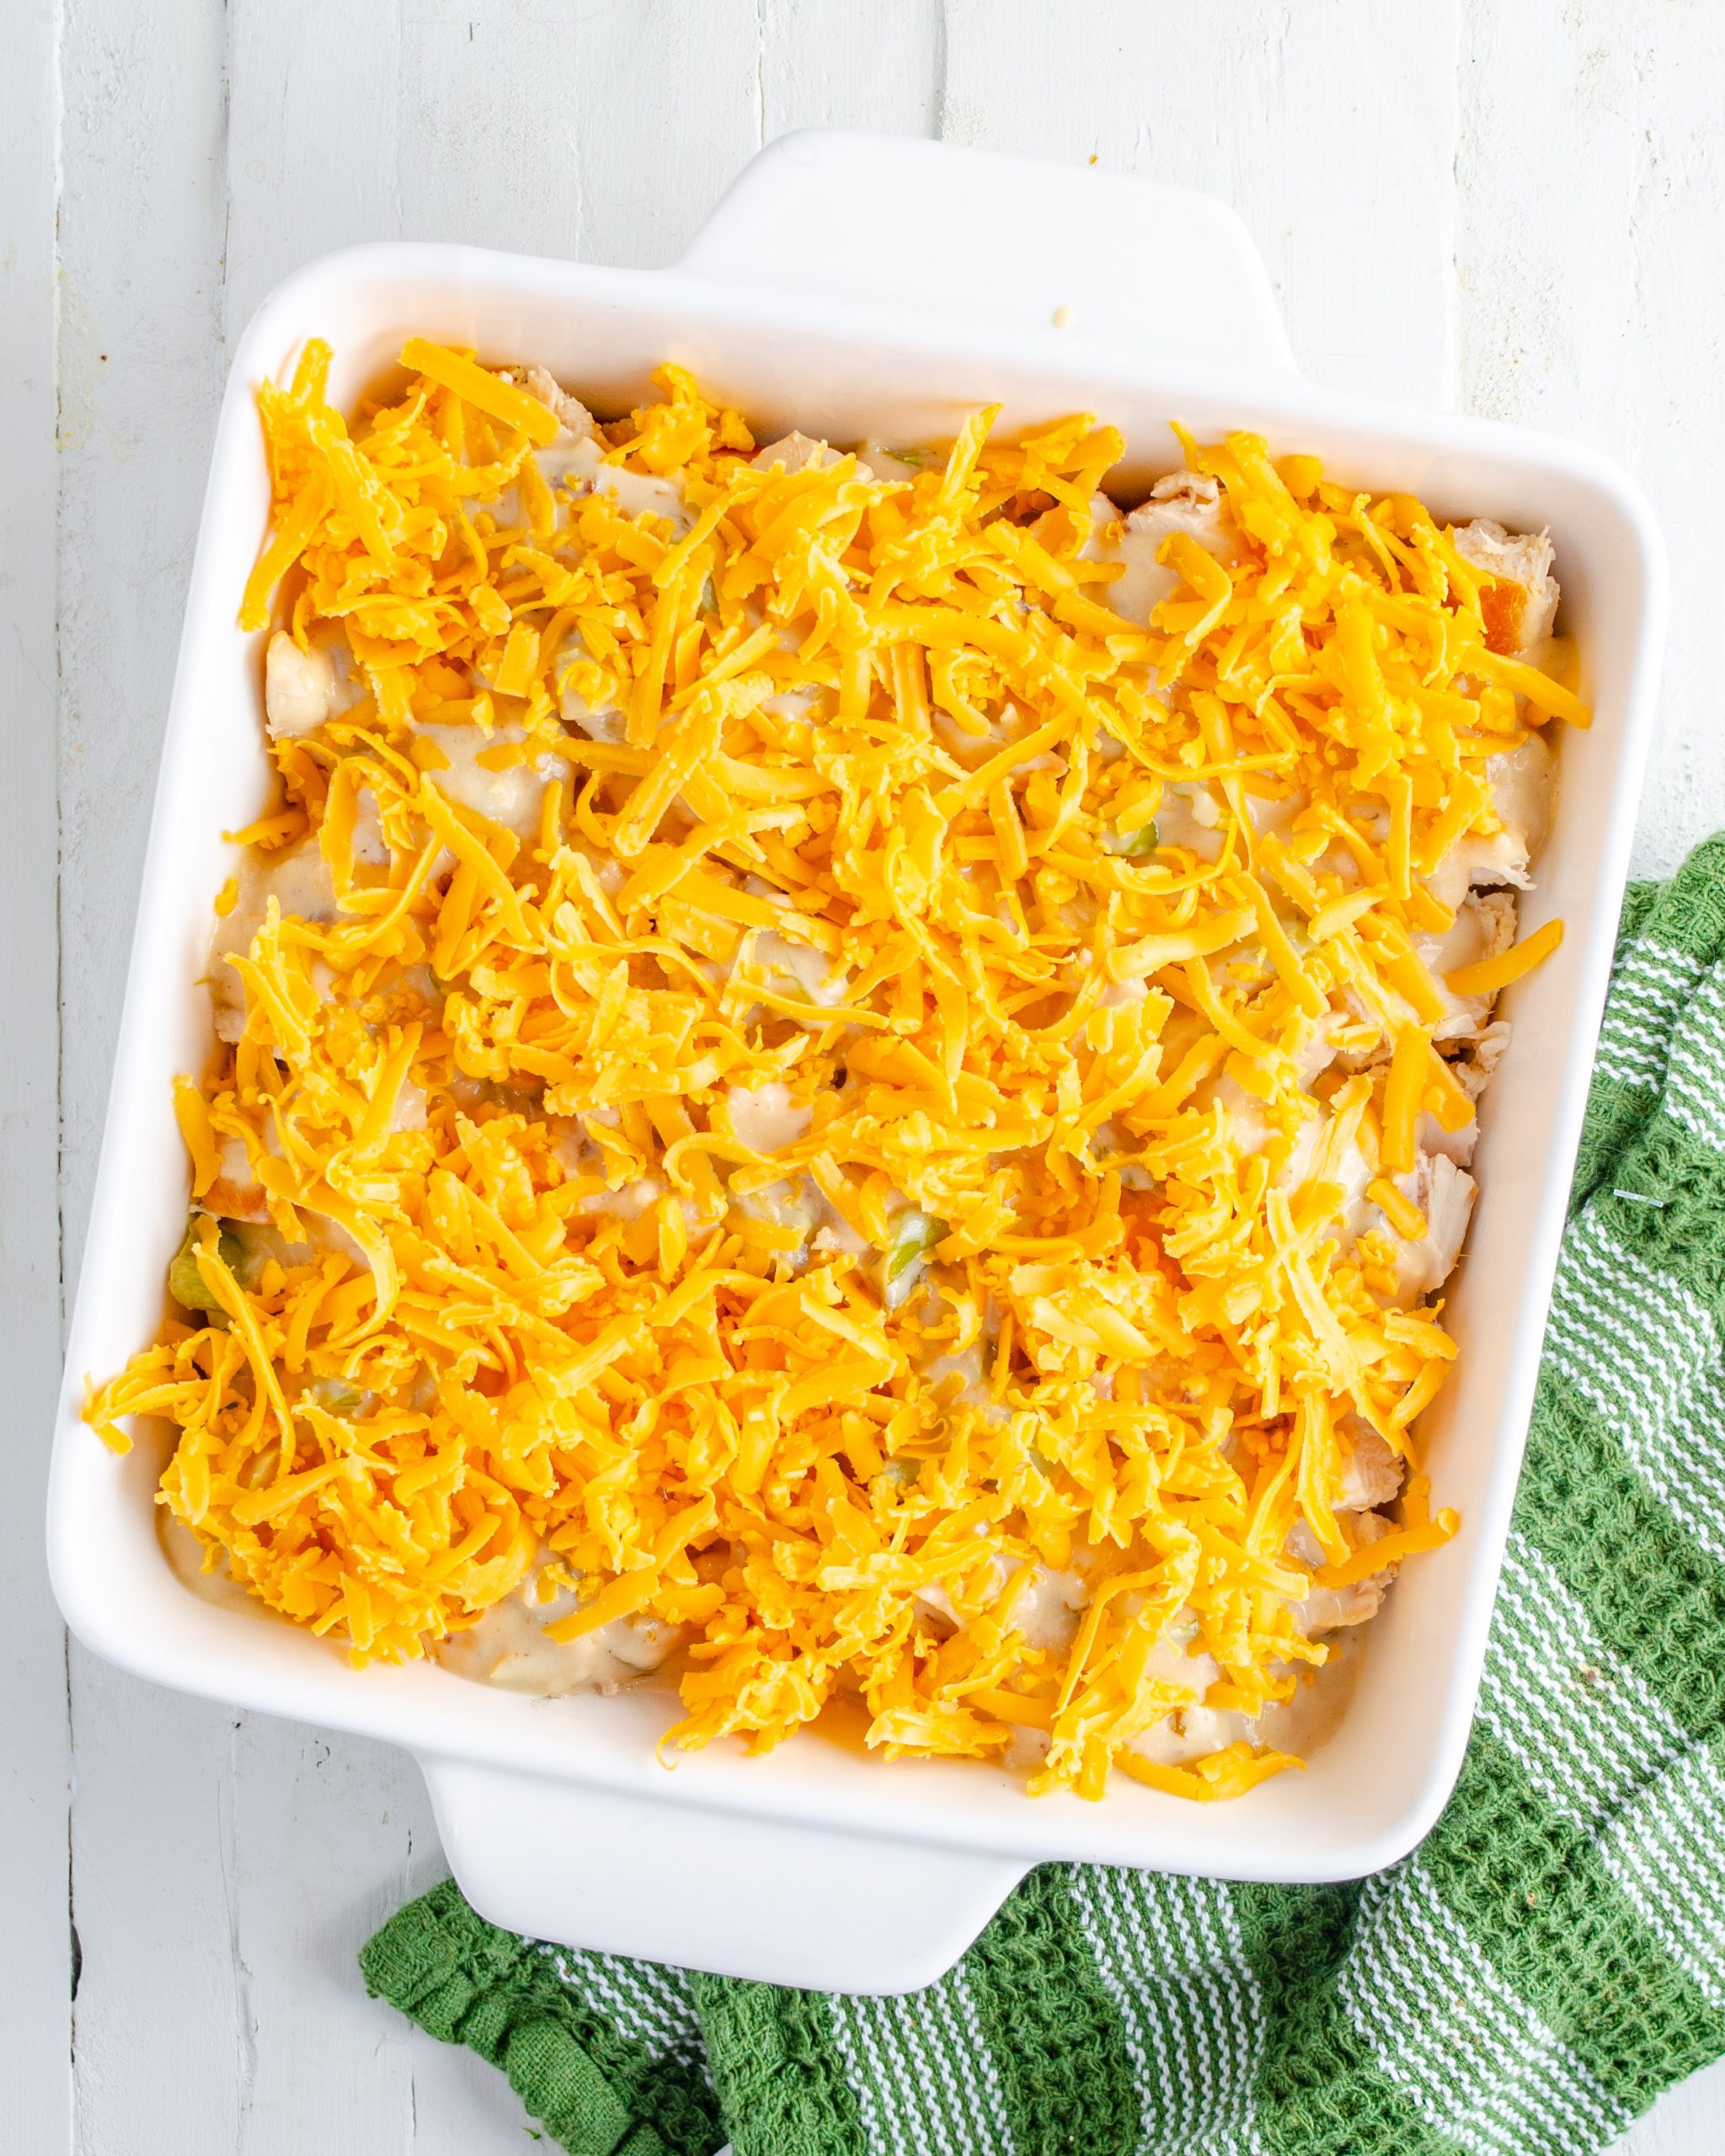 Layer the cheddar cheese on top. 